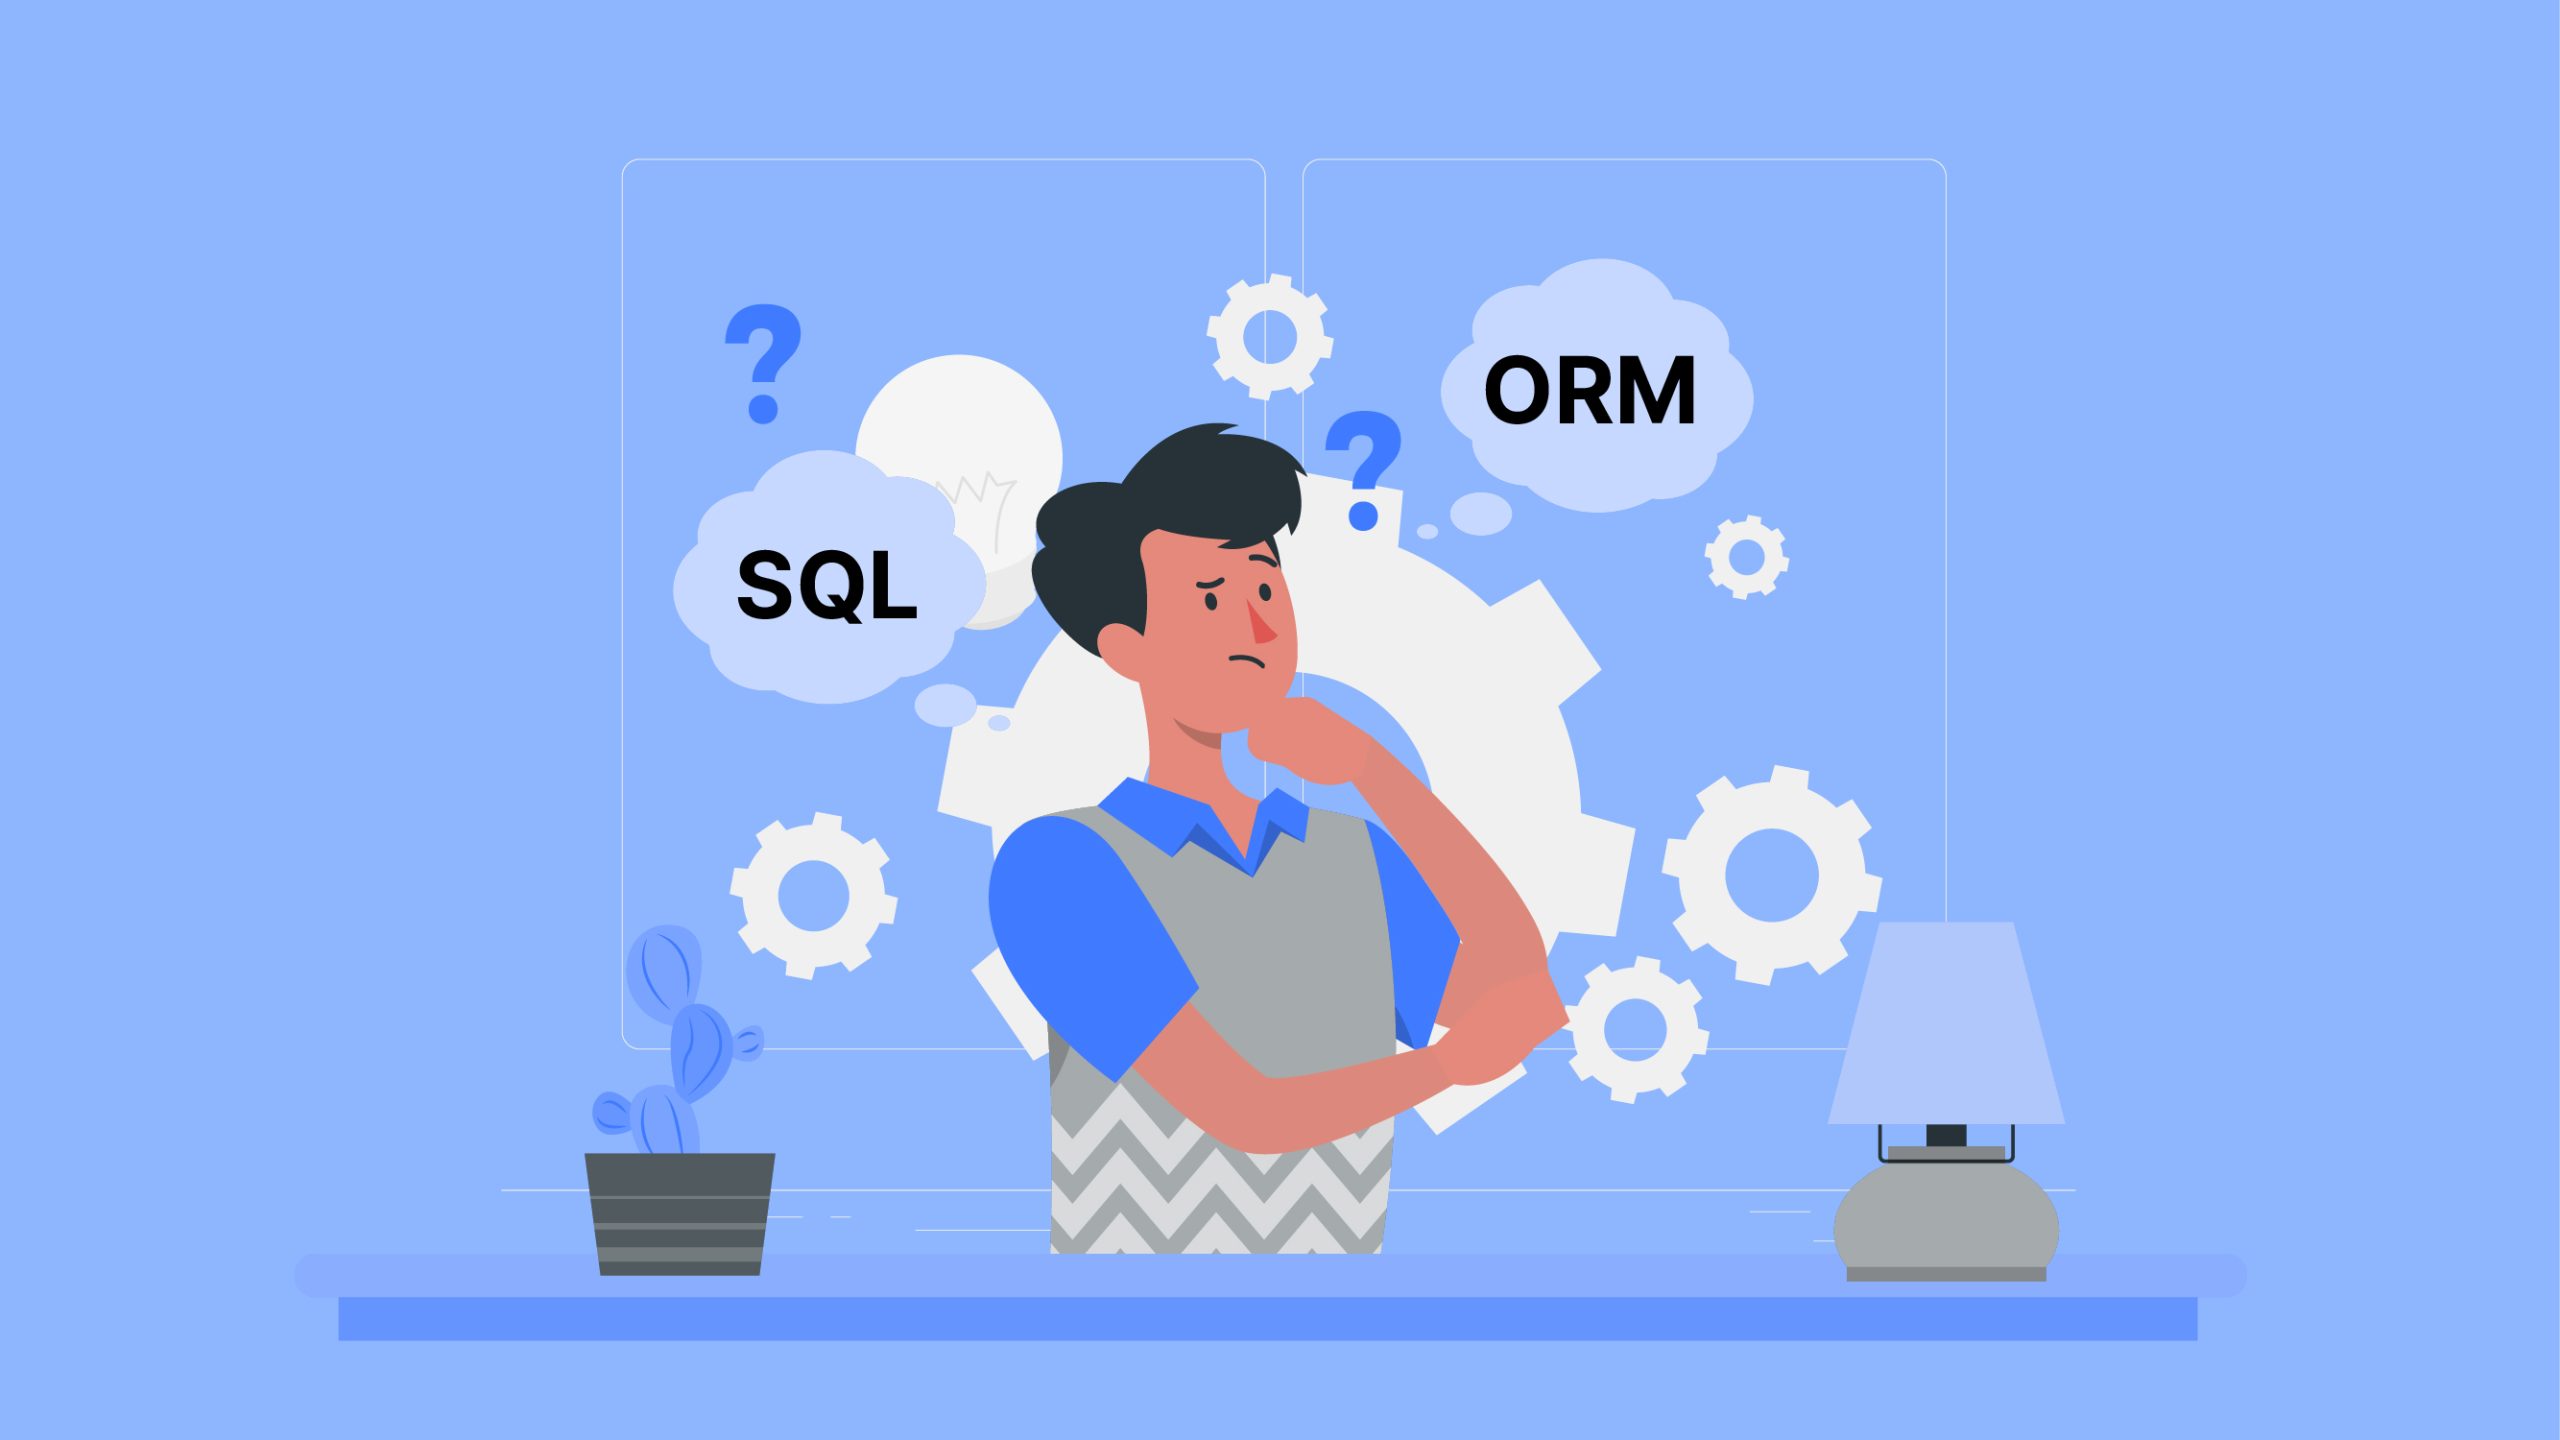 What Is the Difference Between SQL and Object Relational Mapping?